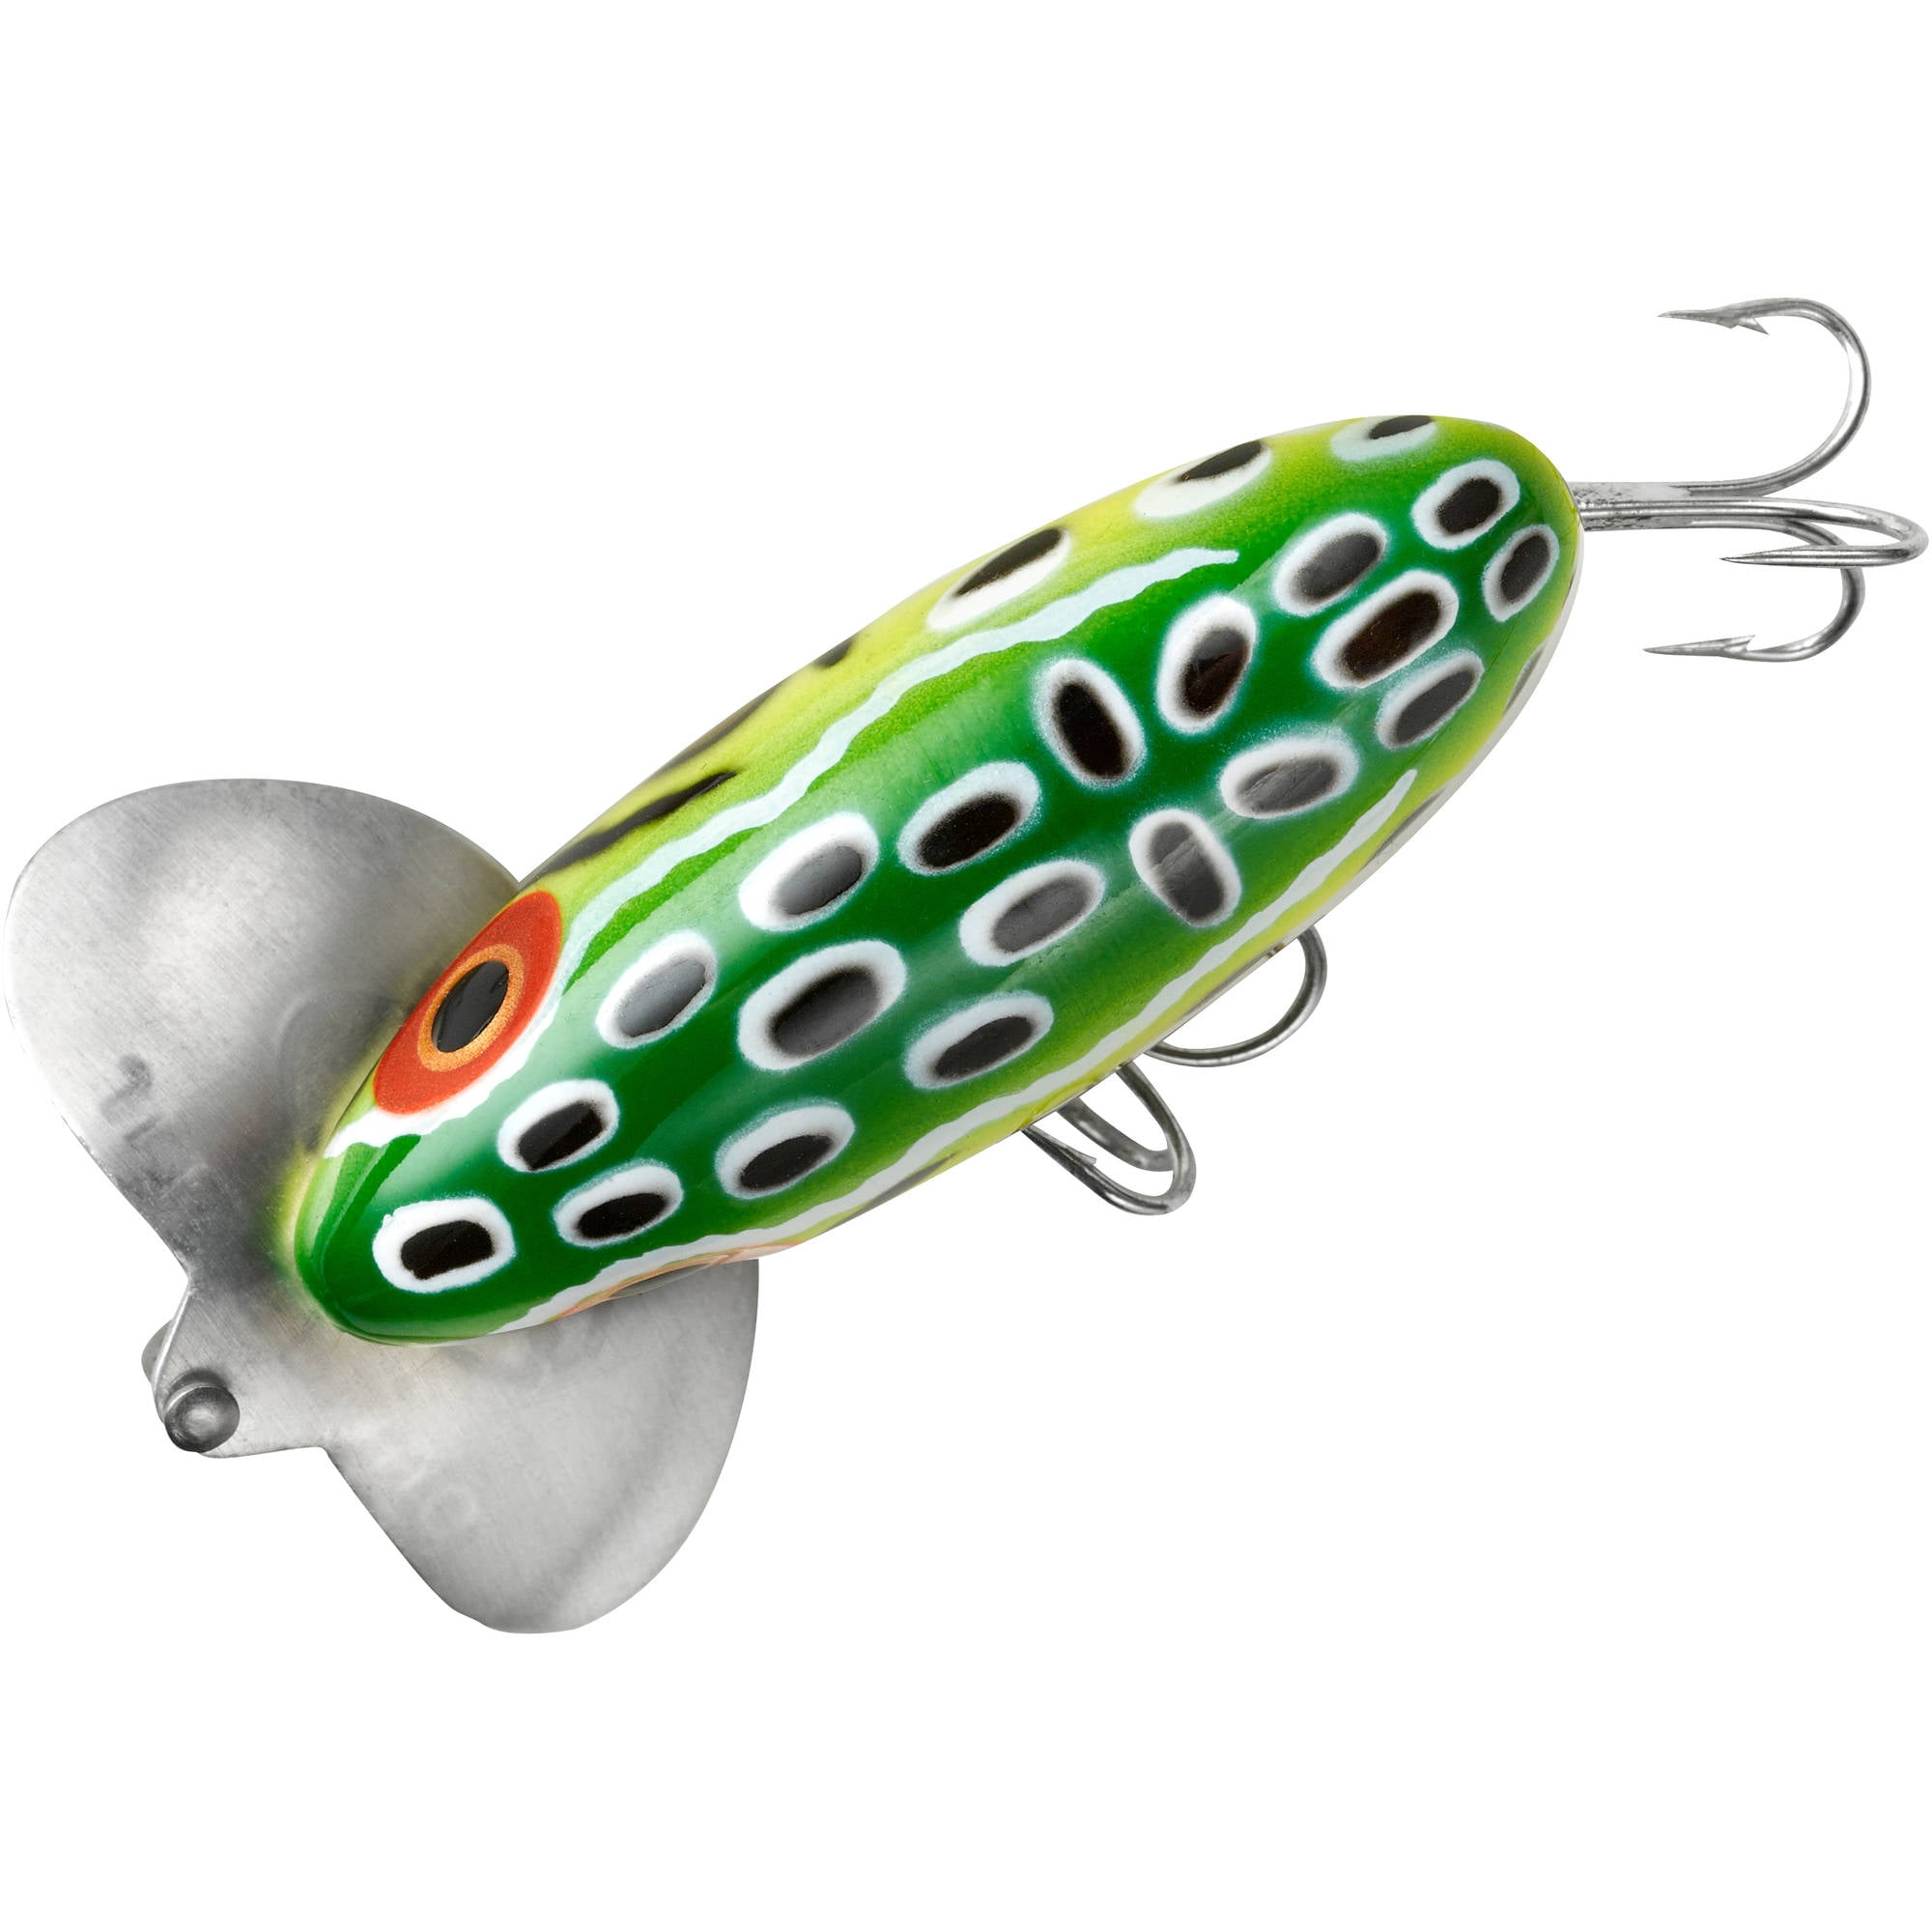  Arbogast Jointed Jitterbug Topwater Bass Fishing Lure,  Excellent for Night Fishing, White/Red Head, 2 1/2, 3/8 oz : Fishing  Diving Lures : Sports & Outdoors